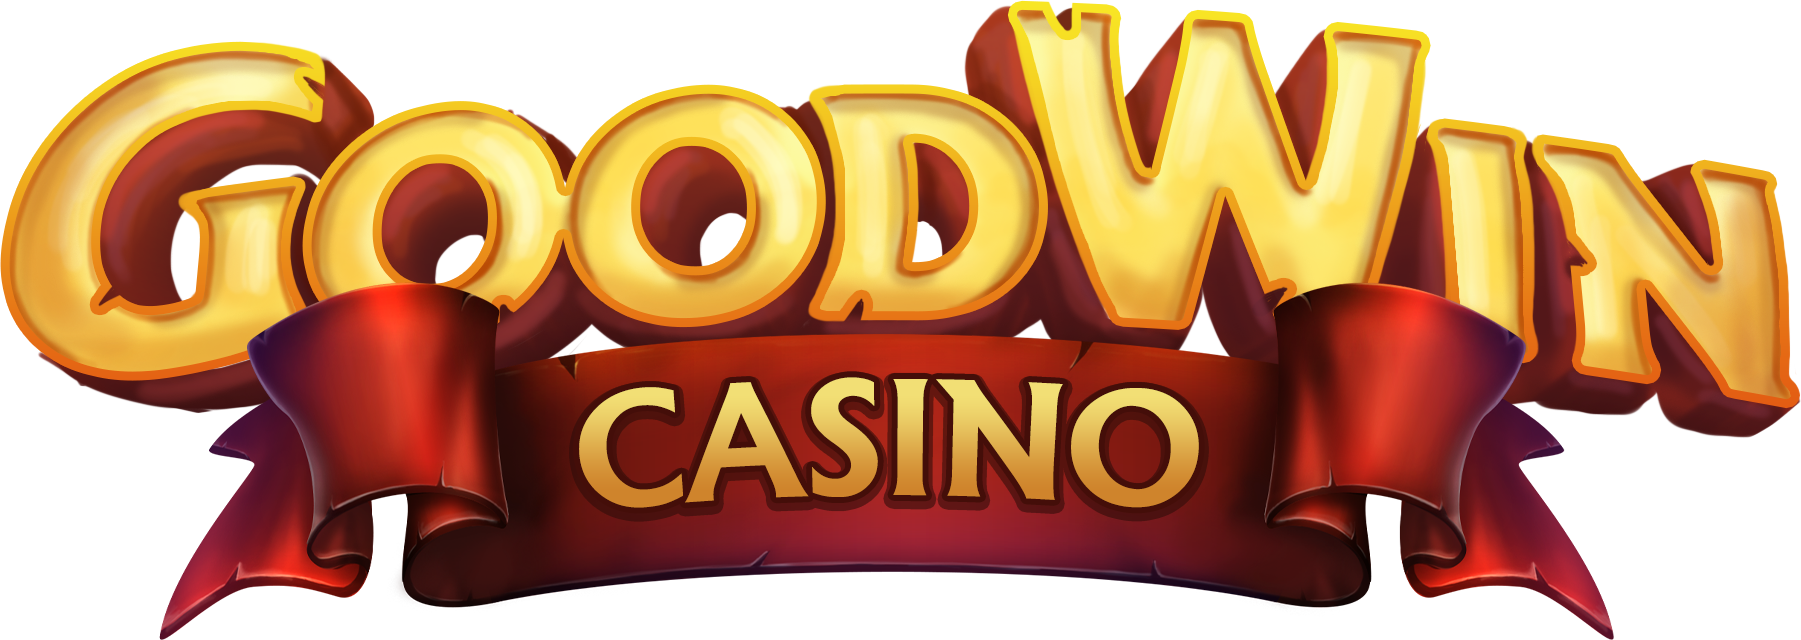 Cryptocurrency Revolution At GoodWin Casino Over The Horizon